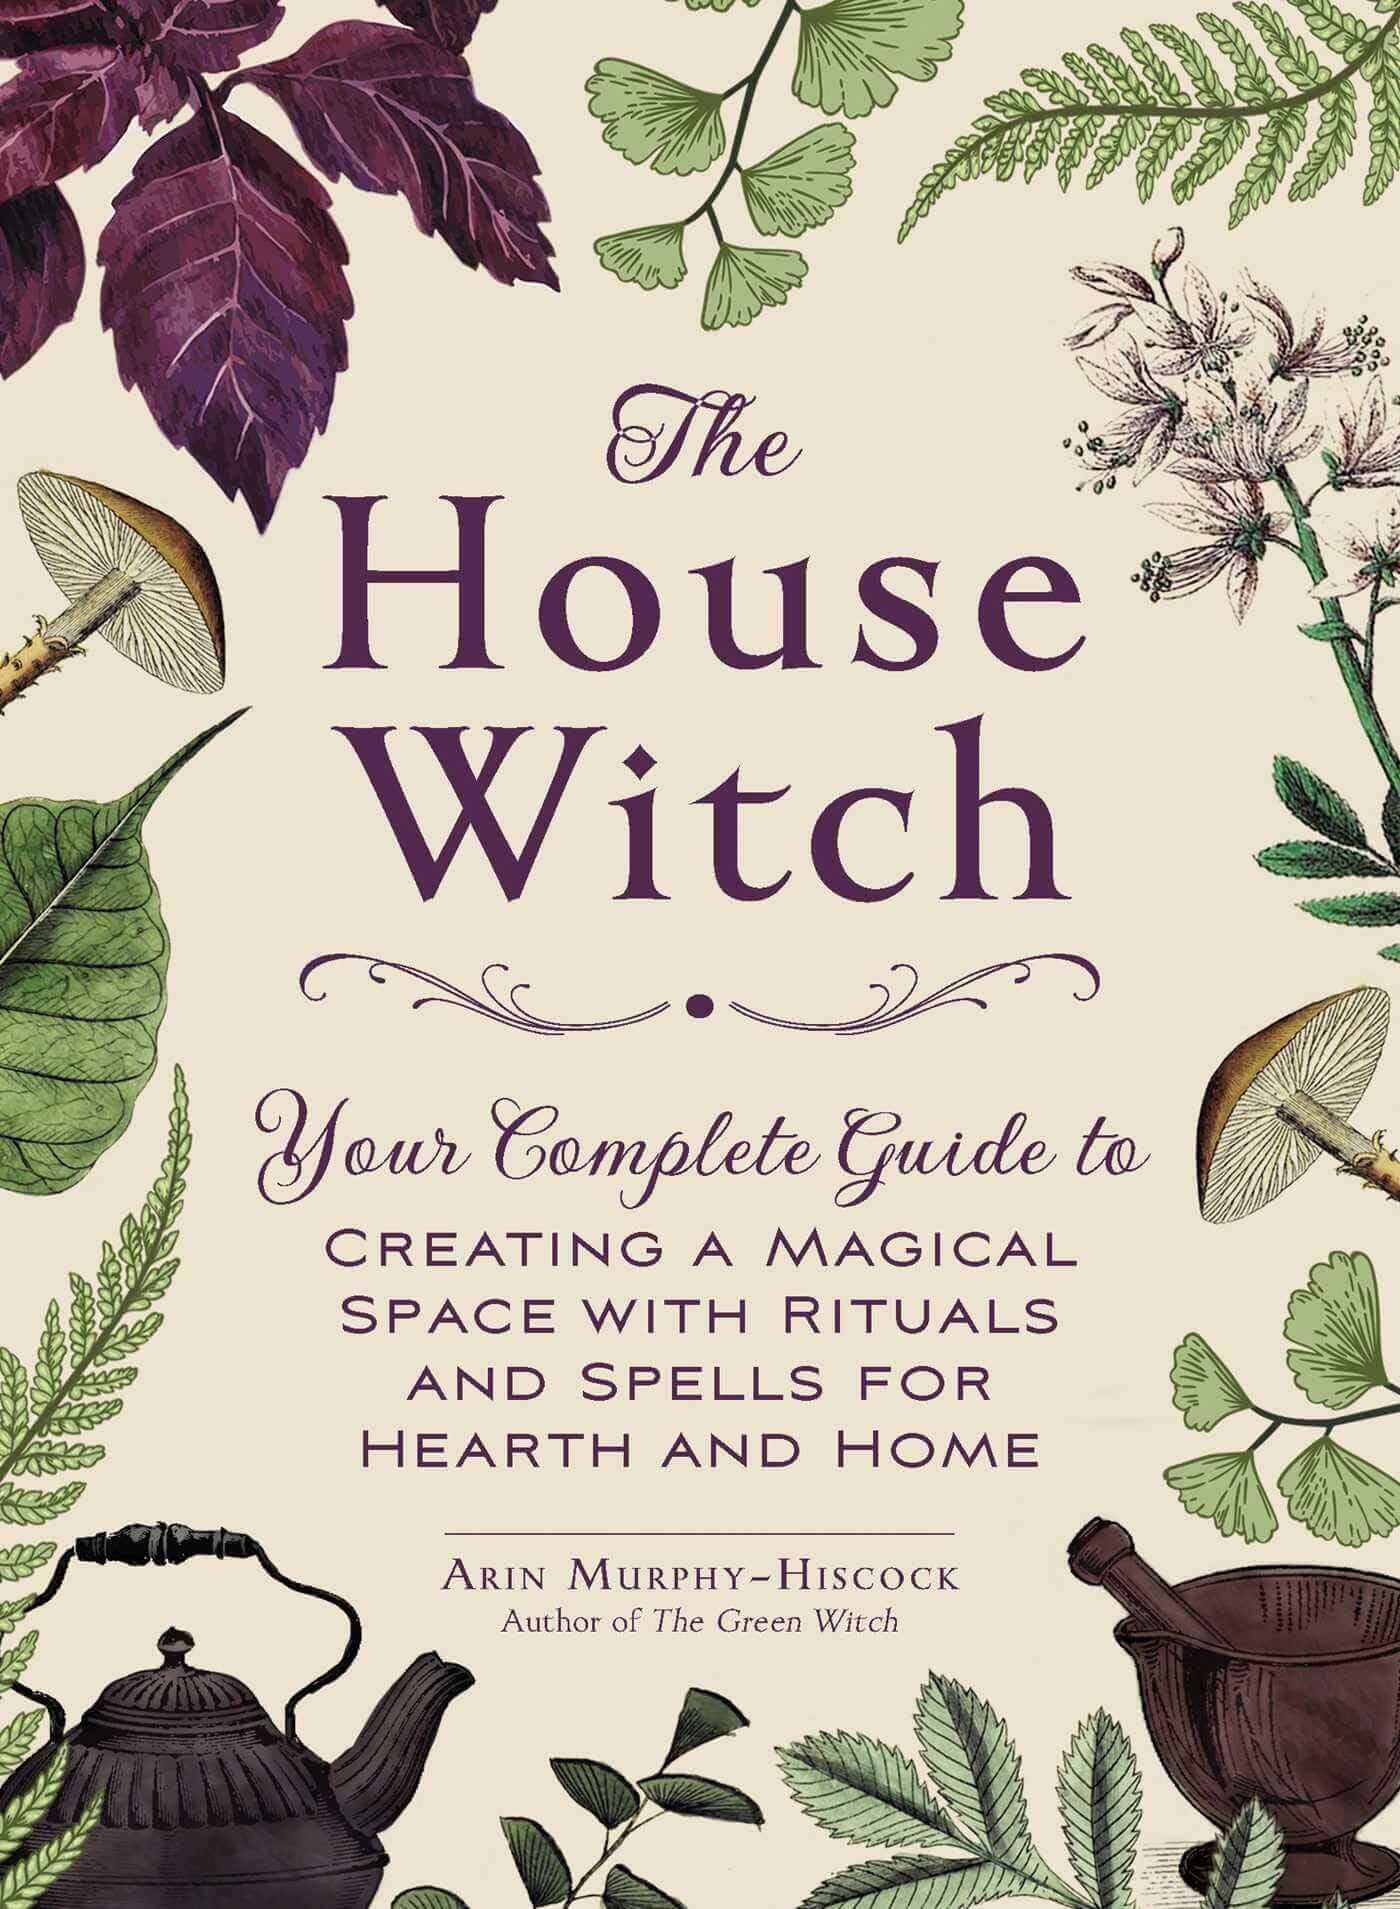 The House Witch: Your Complete Guide to Creating a Magical Space at $21.72 only from Spiral Rain